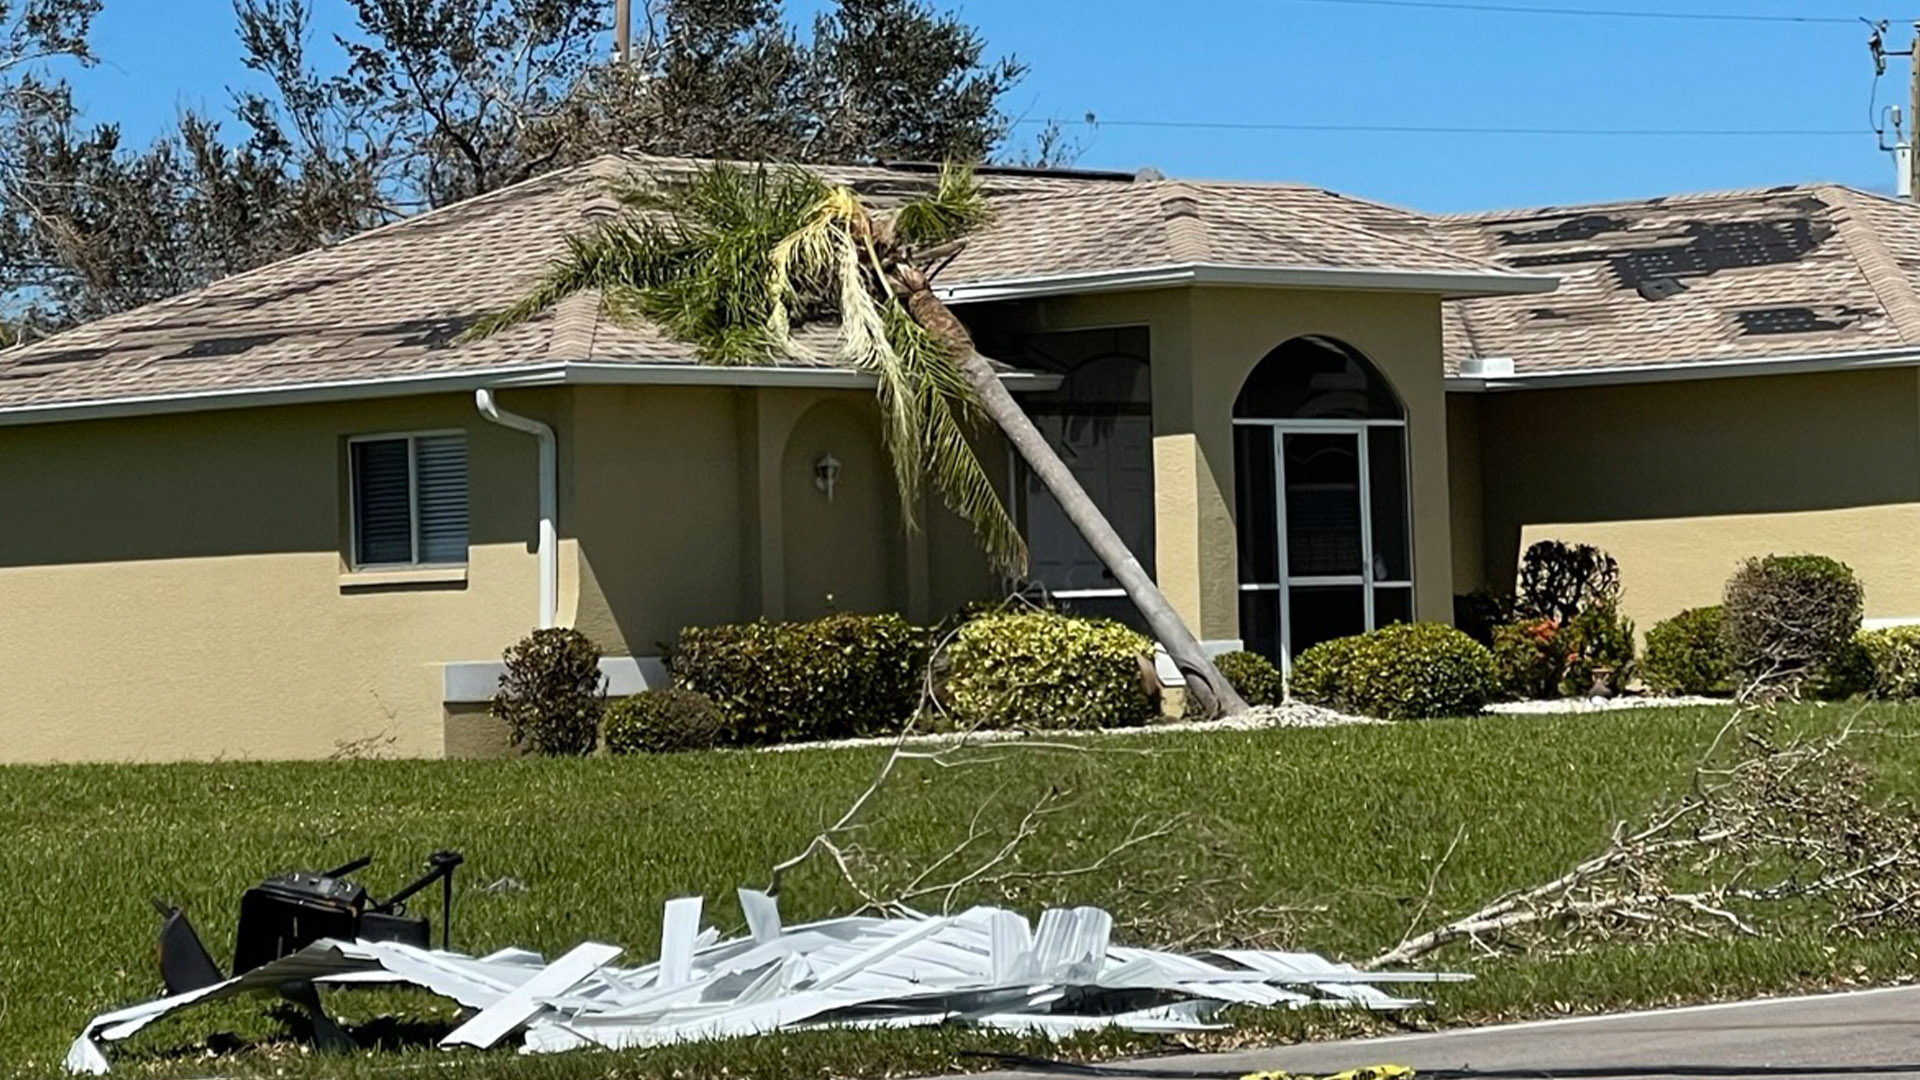 Does Homeowners insurance cover hurricane damage